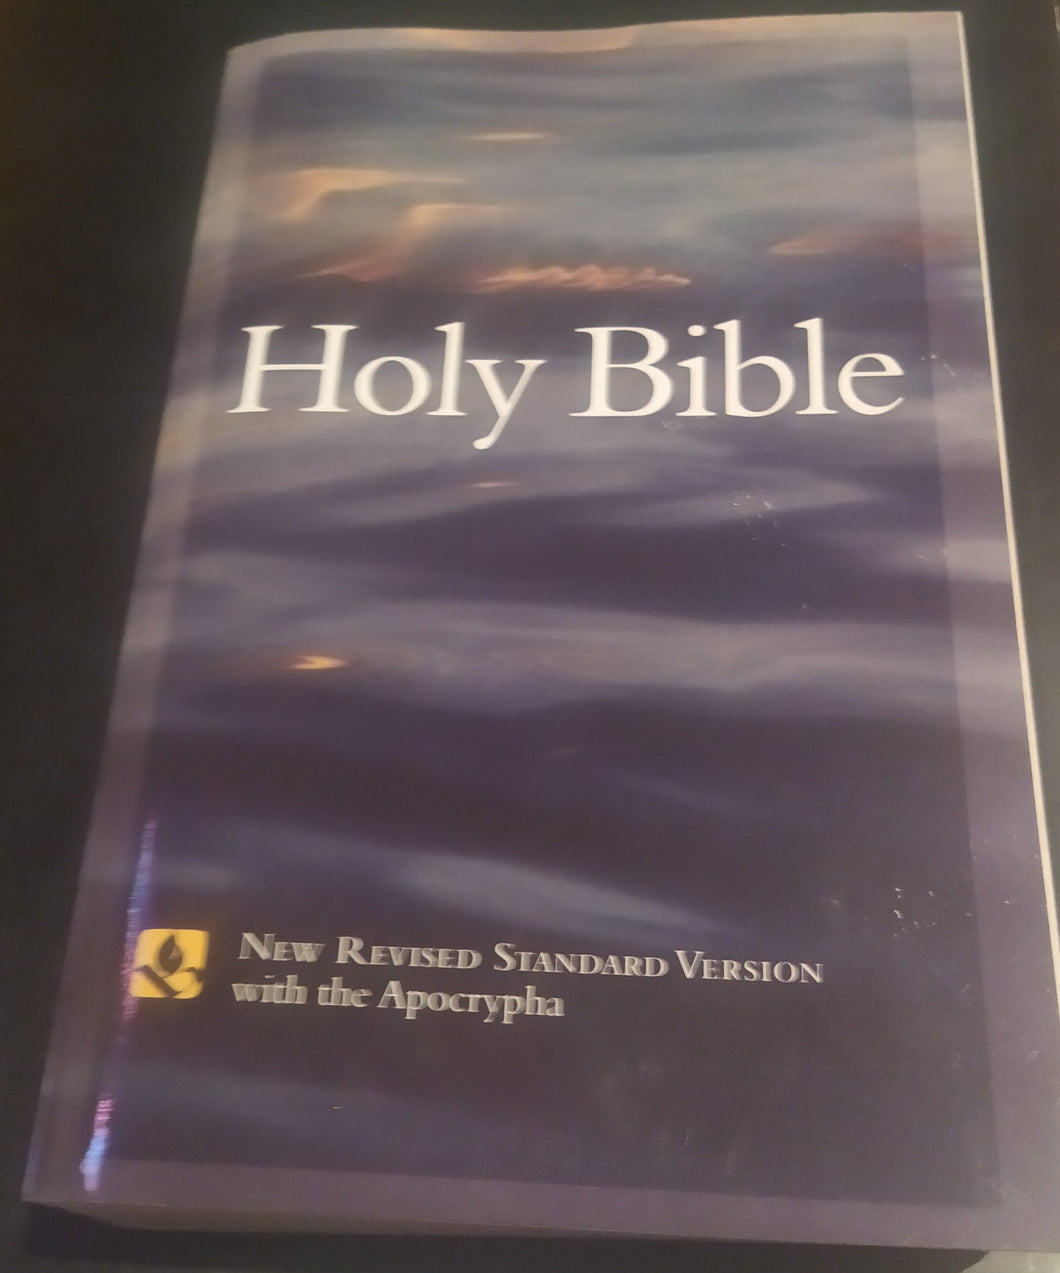 Holy Bible - NRSV with Apocrypha